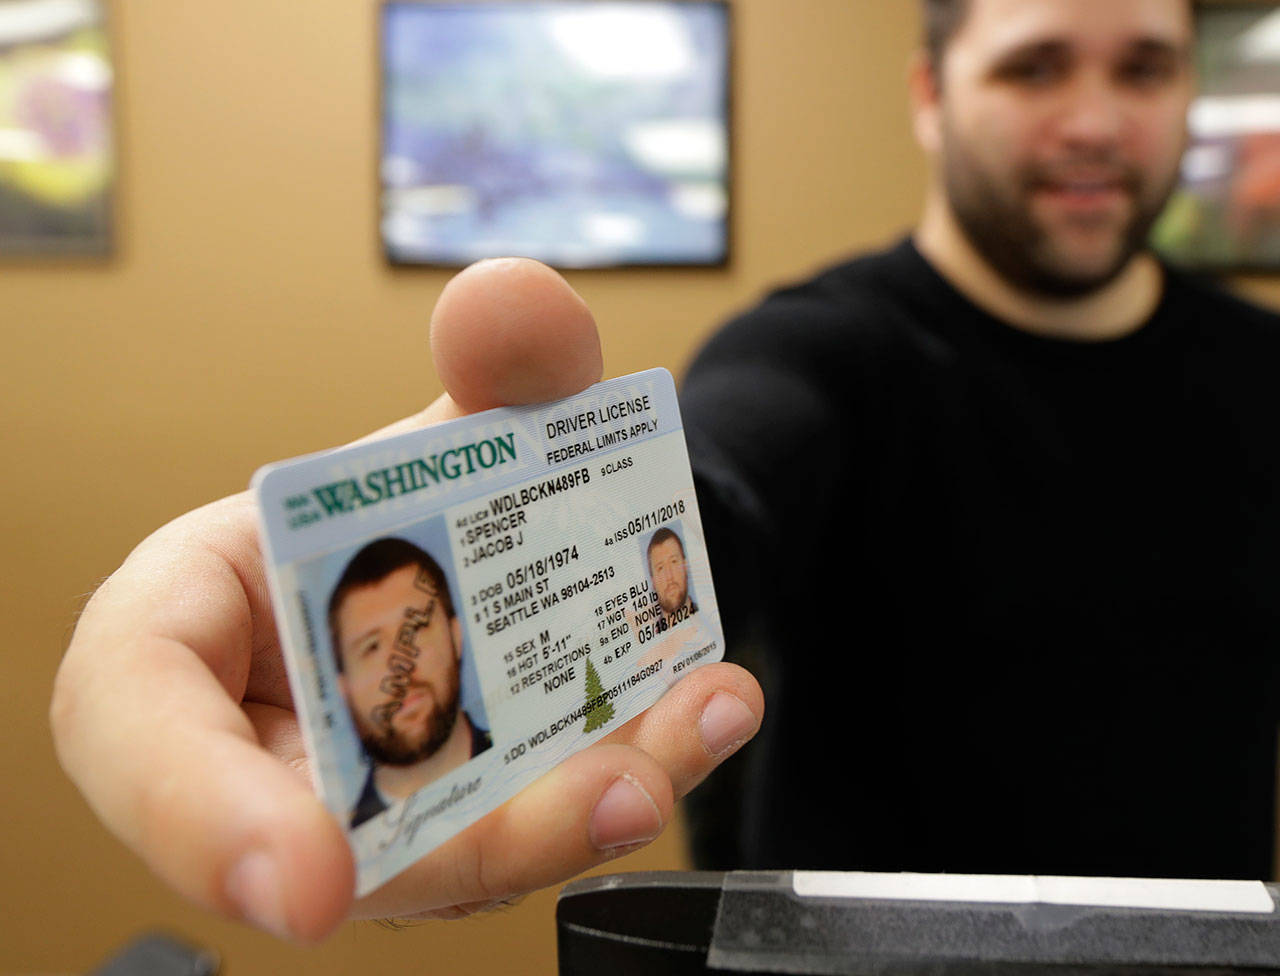 Ryan Norris, a license service representative at the state Deptartment of Licensing office in Lacey poses for a photo June 22 while holding a sample copy of a Washington drivers license. (Ted S. Warren/The Associated Press)